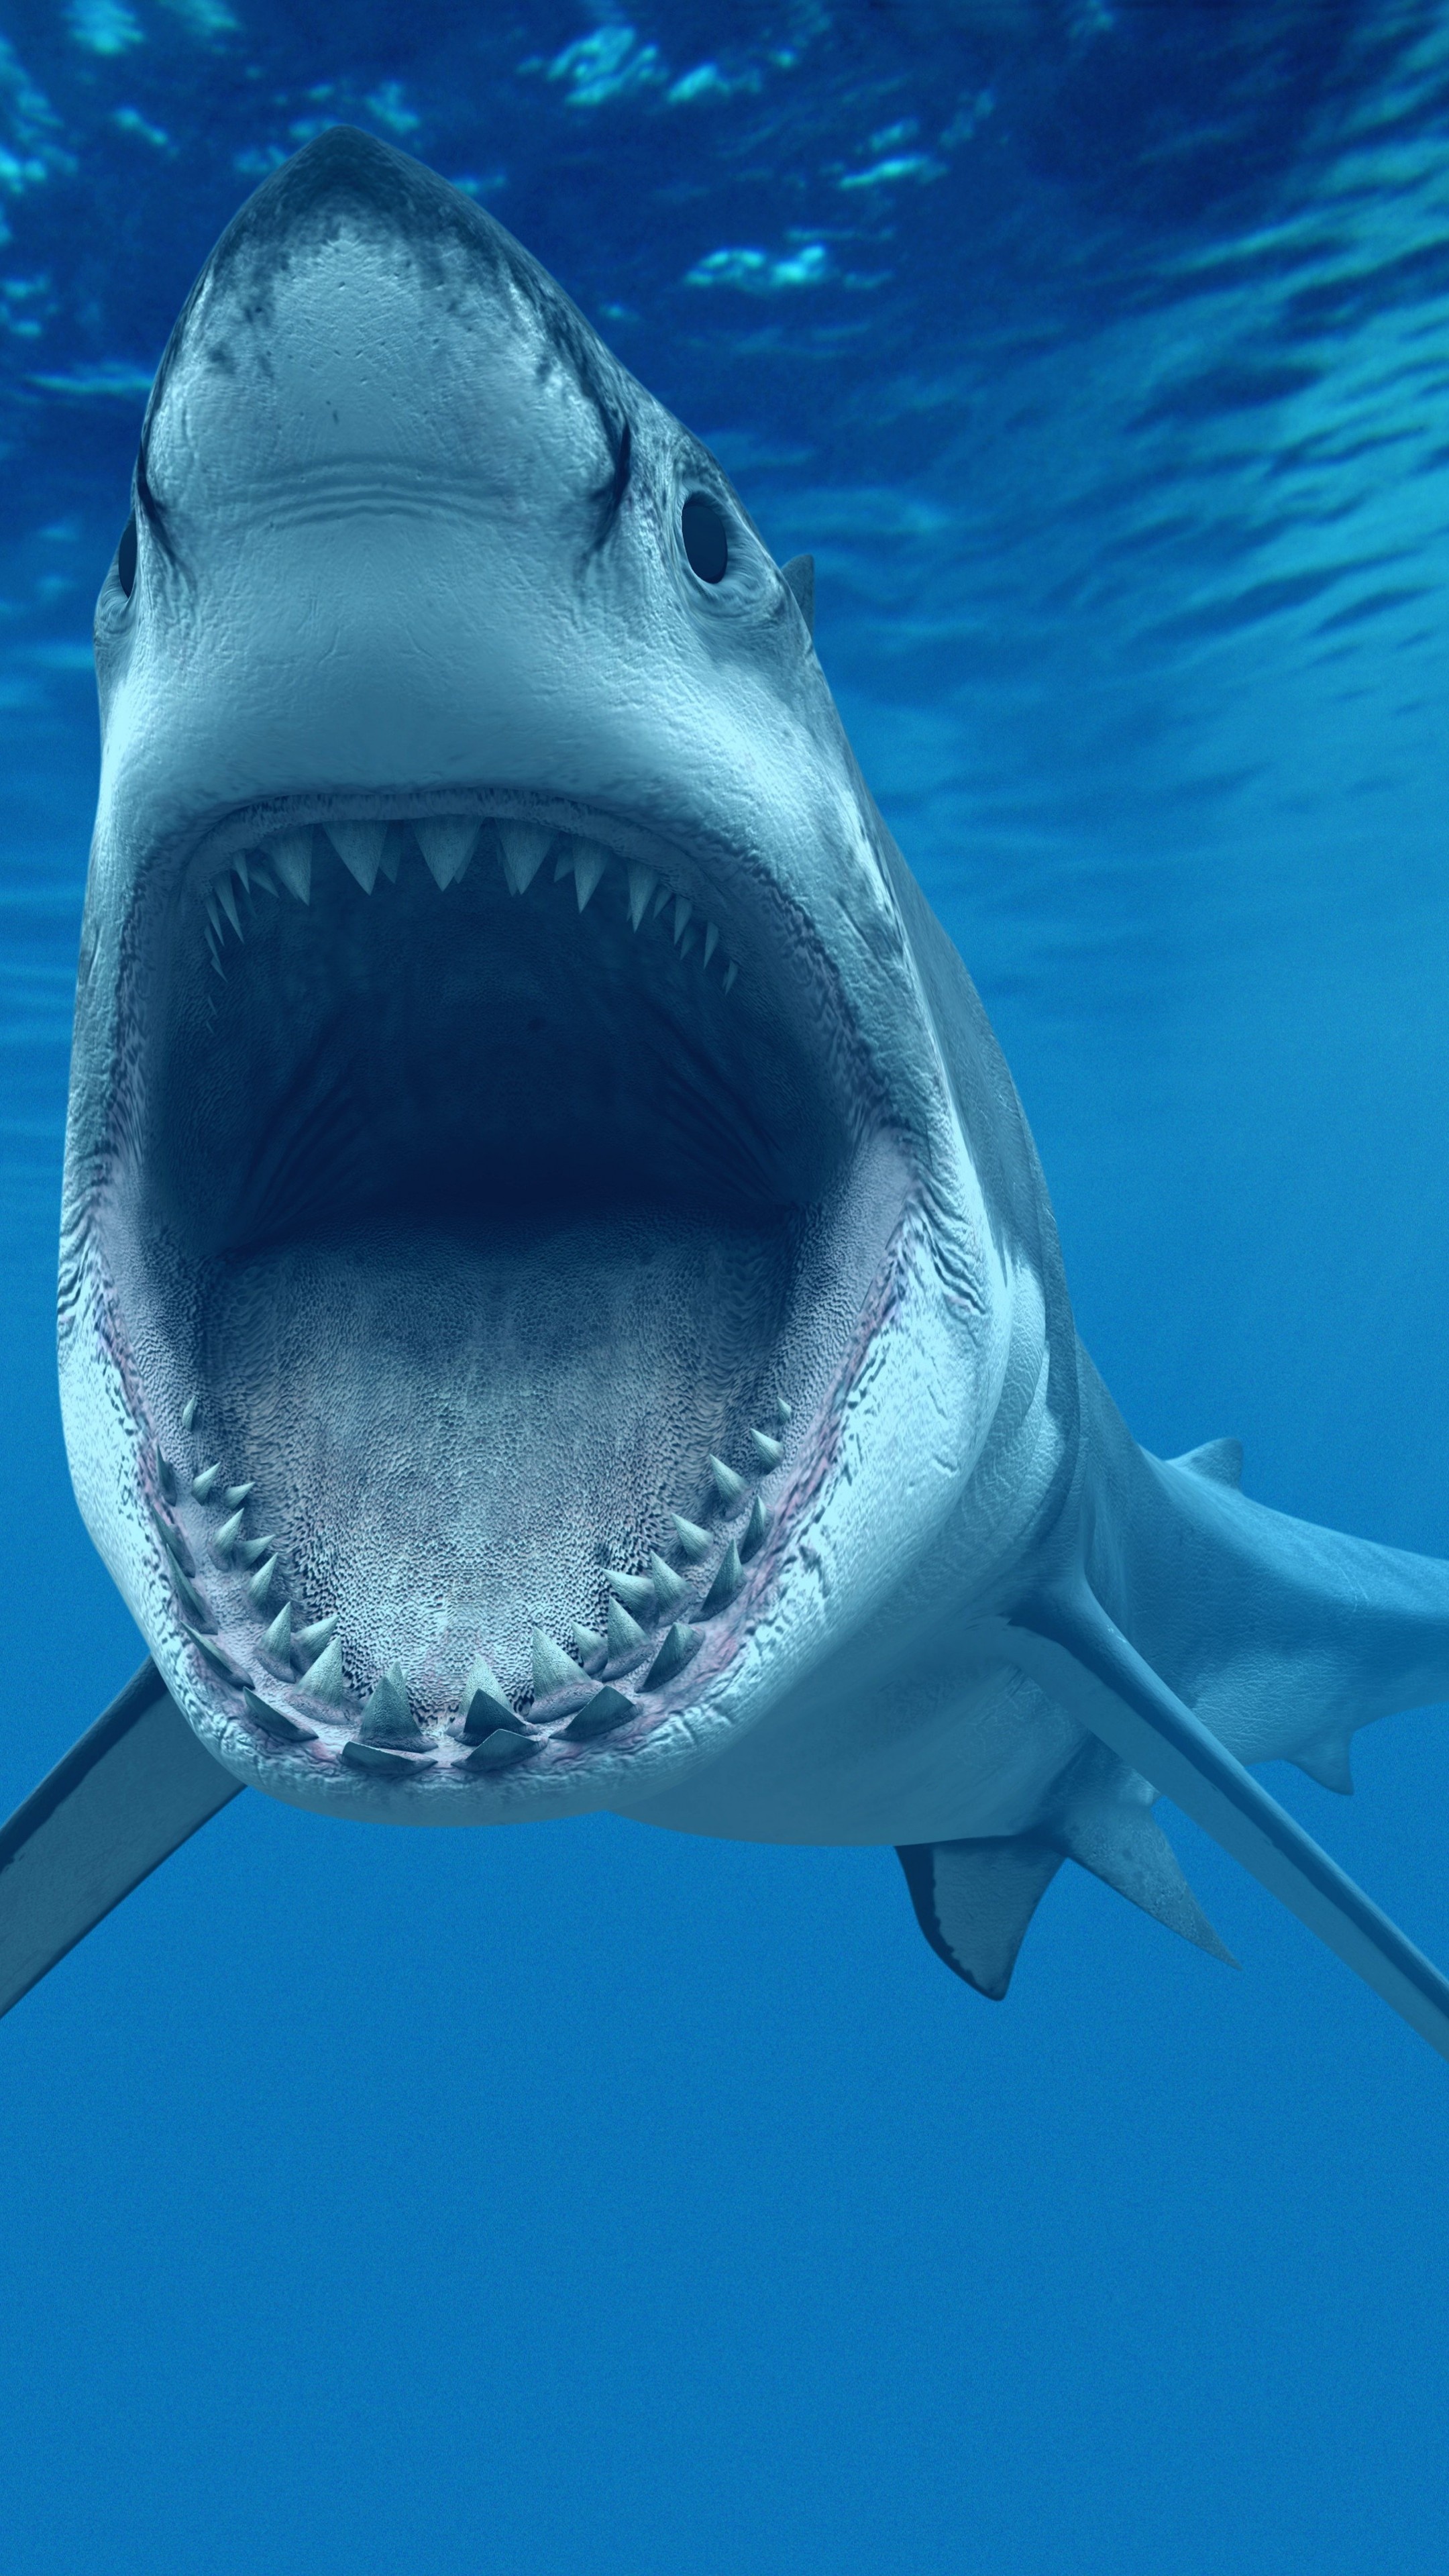 Great White Shark: The only known surviving species of its genus Carcharodon, Dangerous jaws. 2160x3840 4K Background.